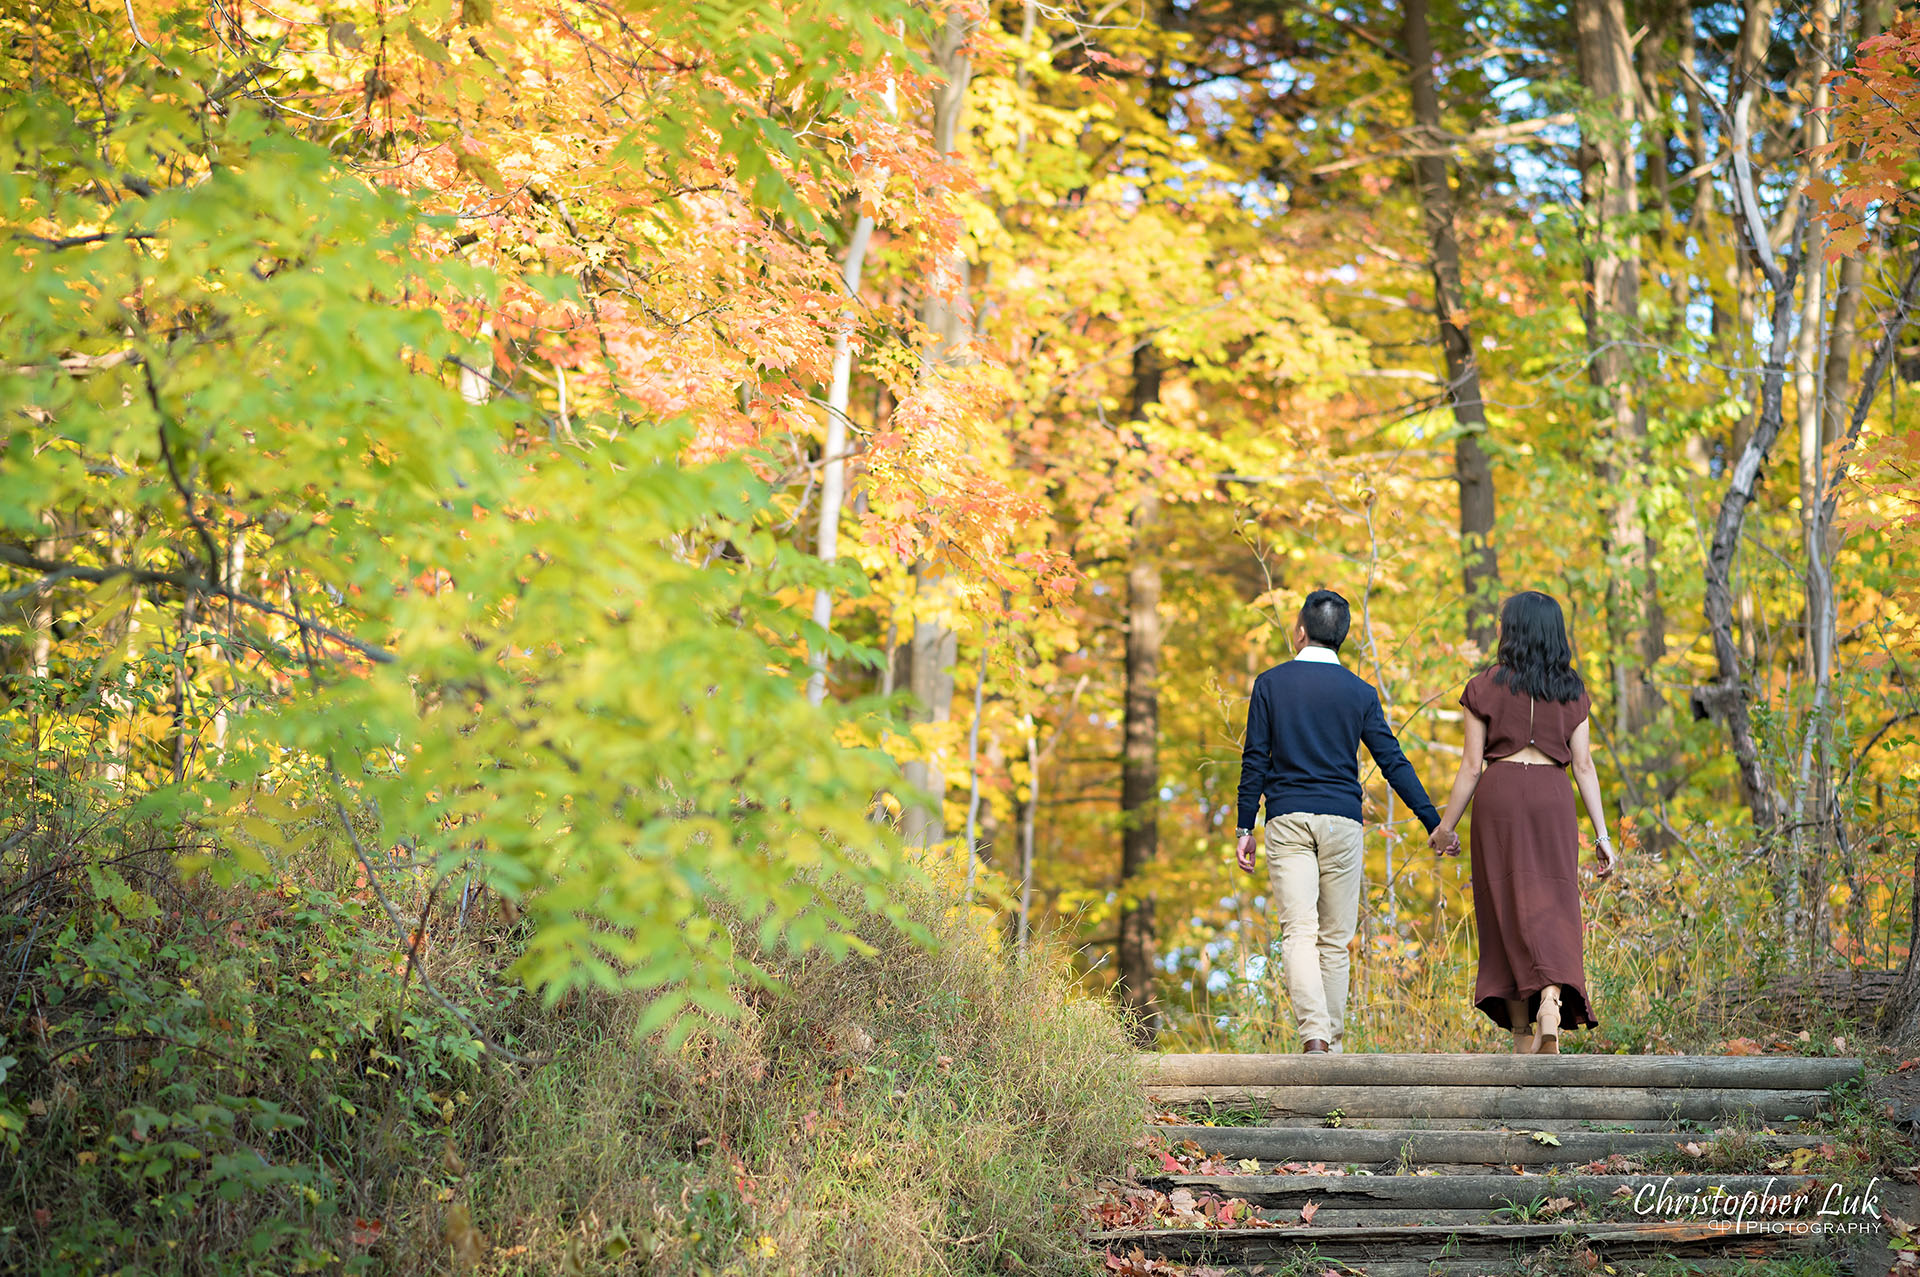 Christopher Luk Toronto Wedding Engagement Session Photographer Autumn Fall Leaves Natural Candid Photojournalistic Bride Groom Hiking Trail Trees Hug Holding Each Other Together Orange Red Yellow Kiss Wood Wooden Stairs Staircase Hiking Trail Steps